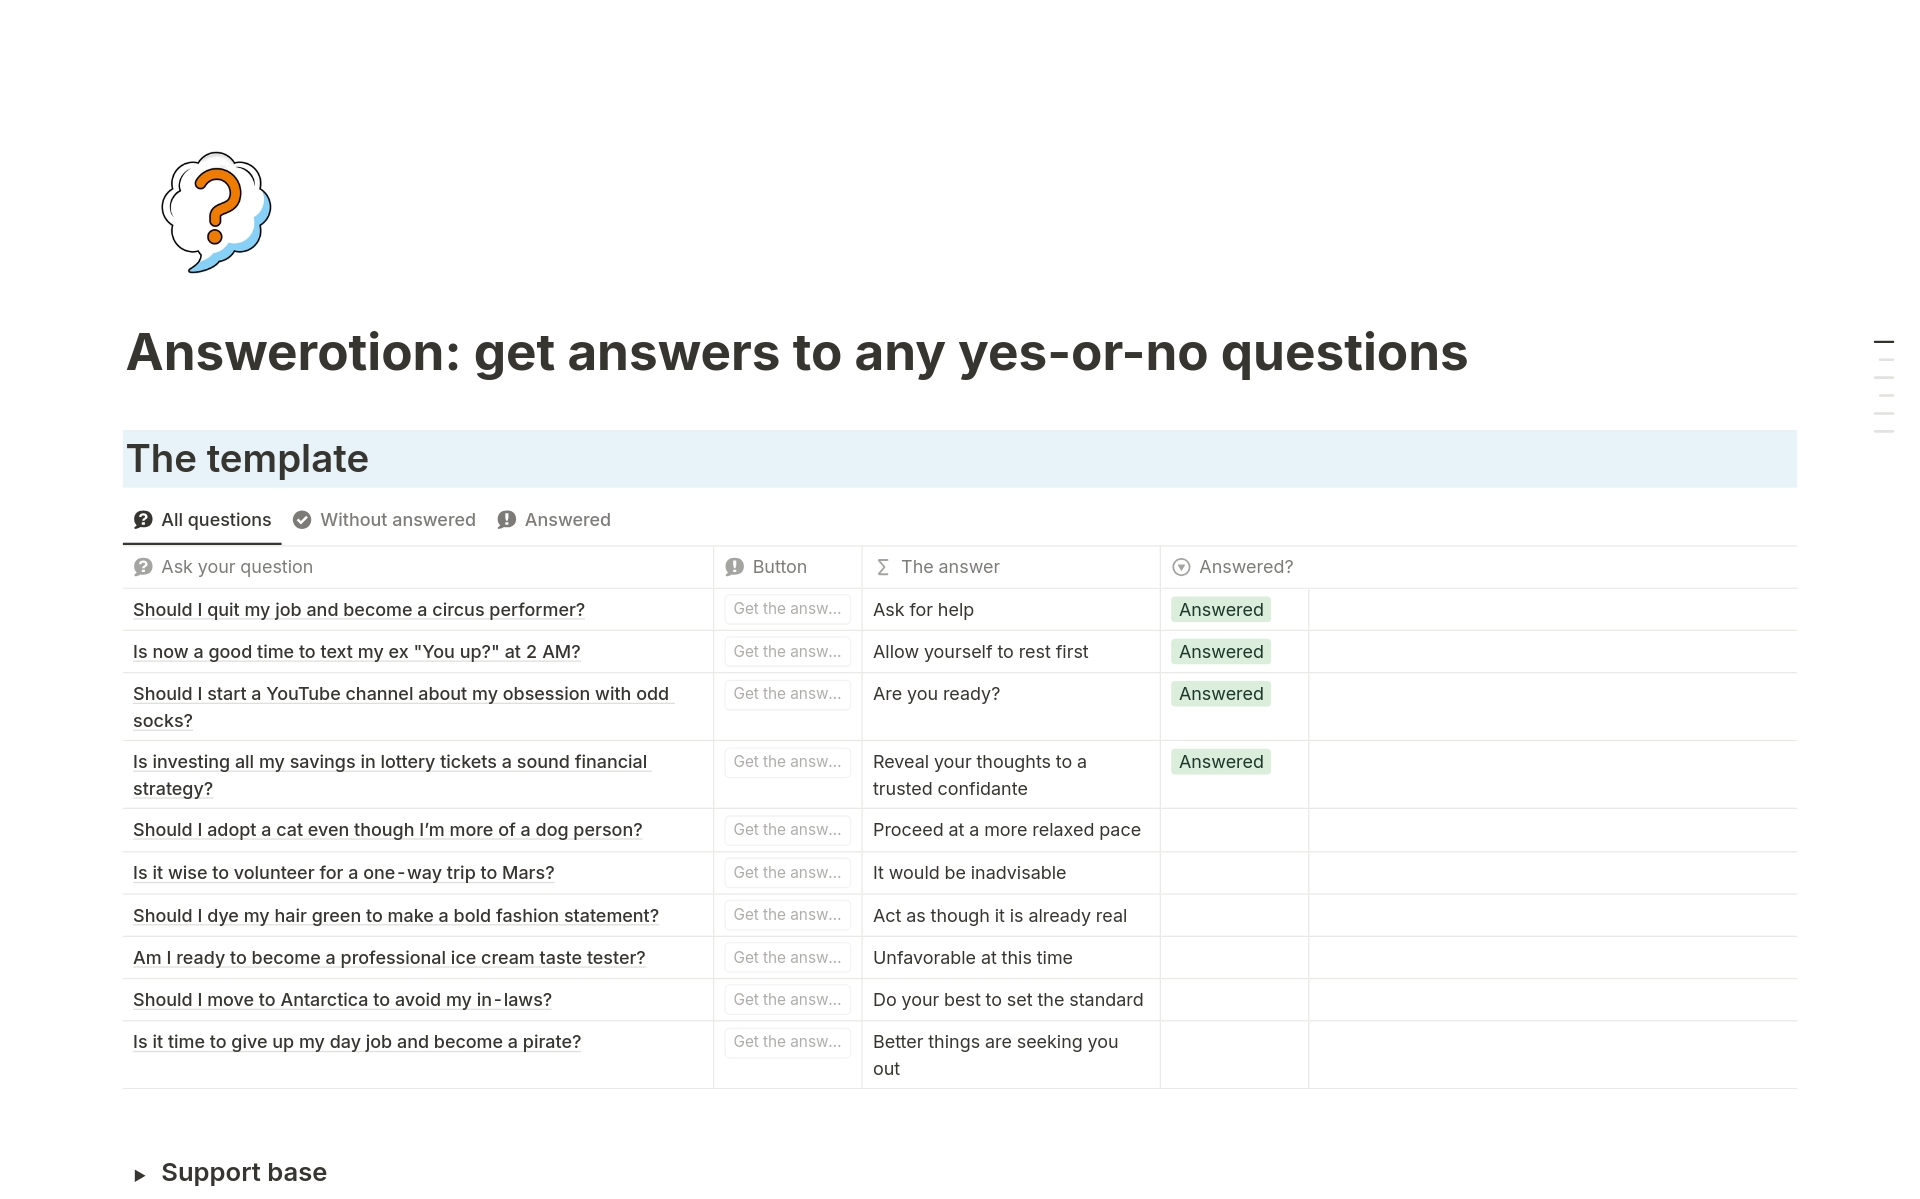 Answerotion is a Notion template that responds to yes-or-no questions. It can provide a direct answer, express doubt, or suggest an action. The responses are inspired by Carol Bolt's "The Book of Answers."